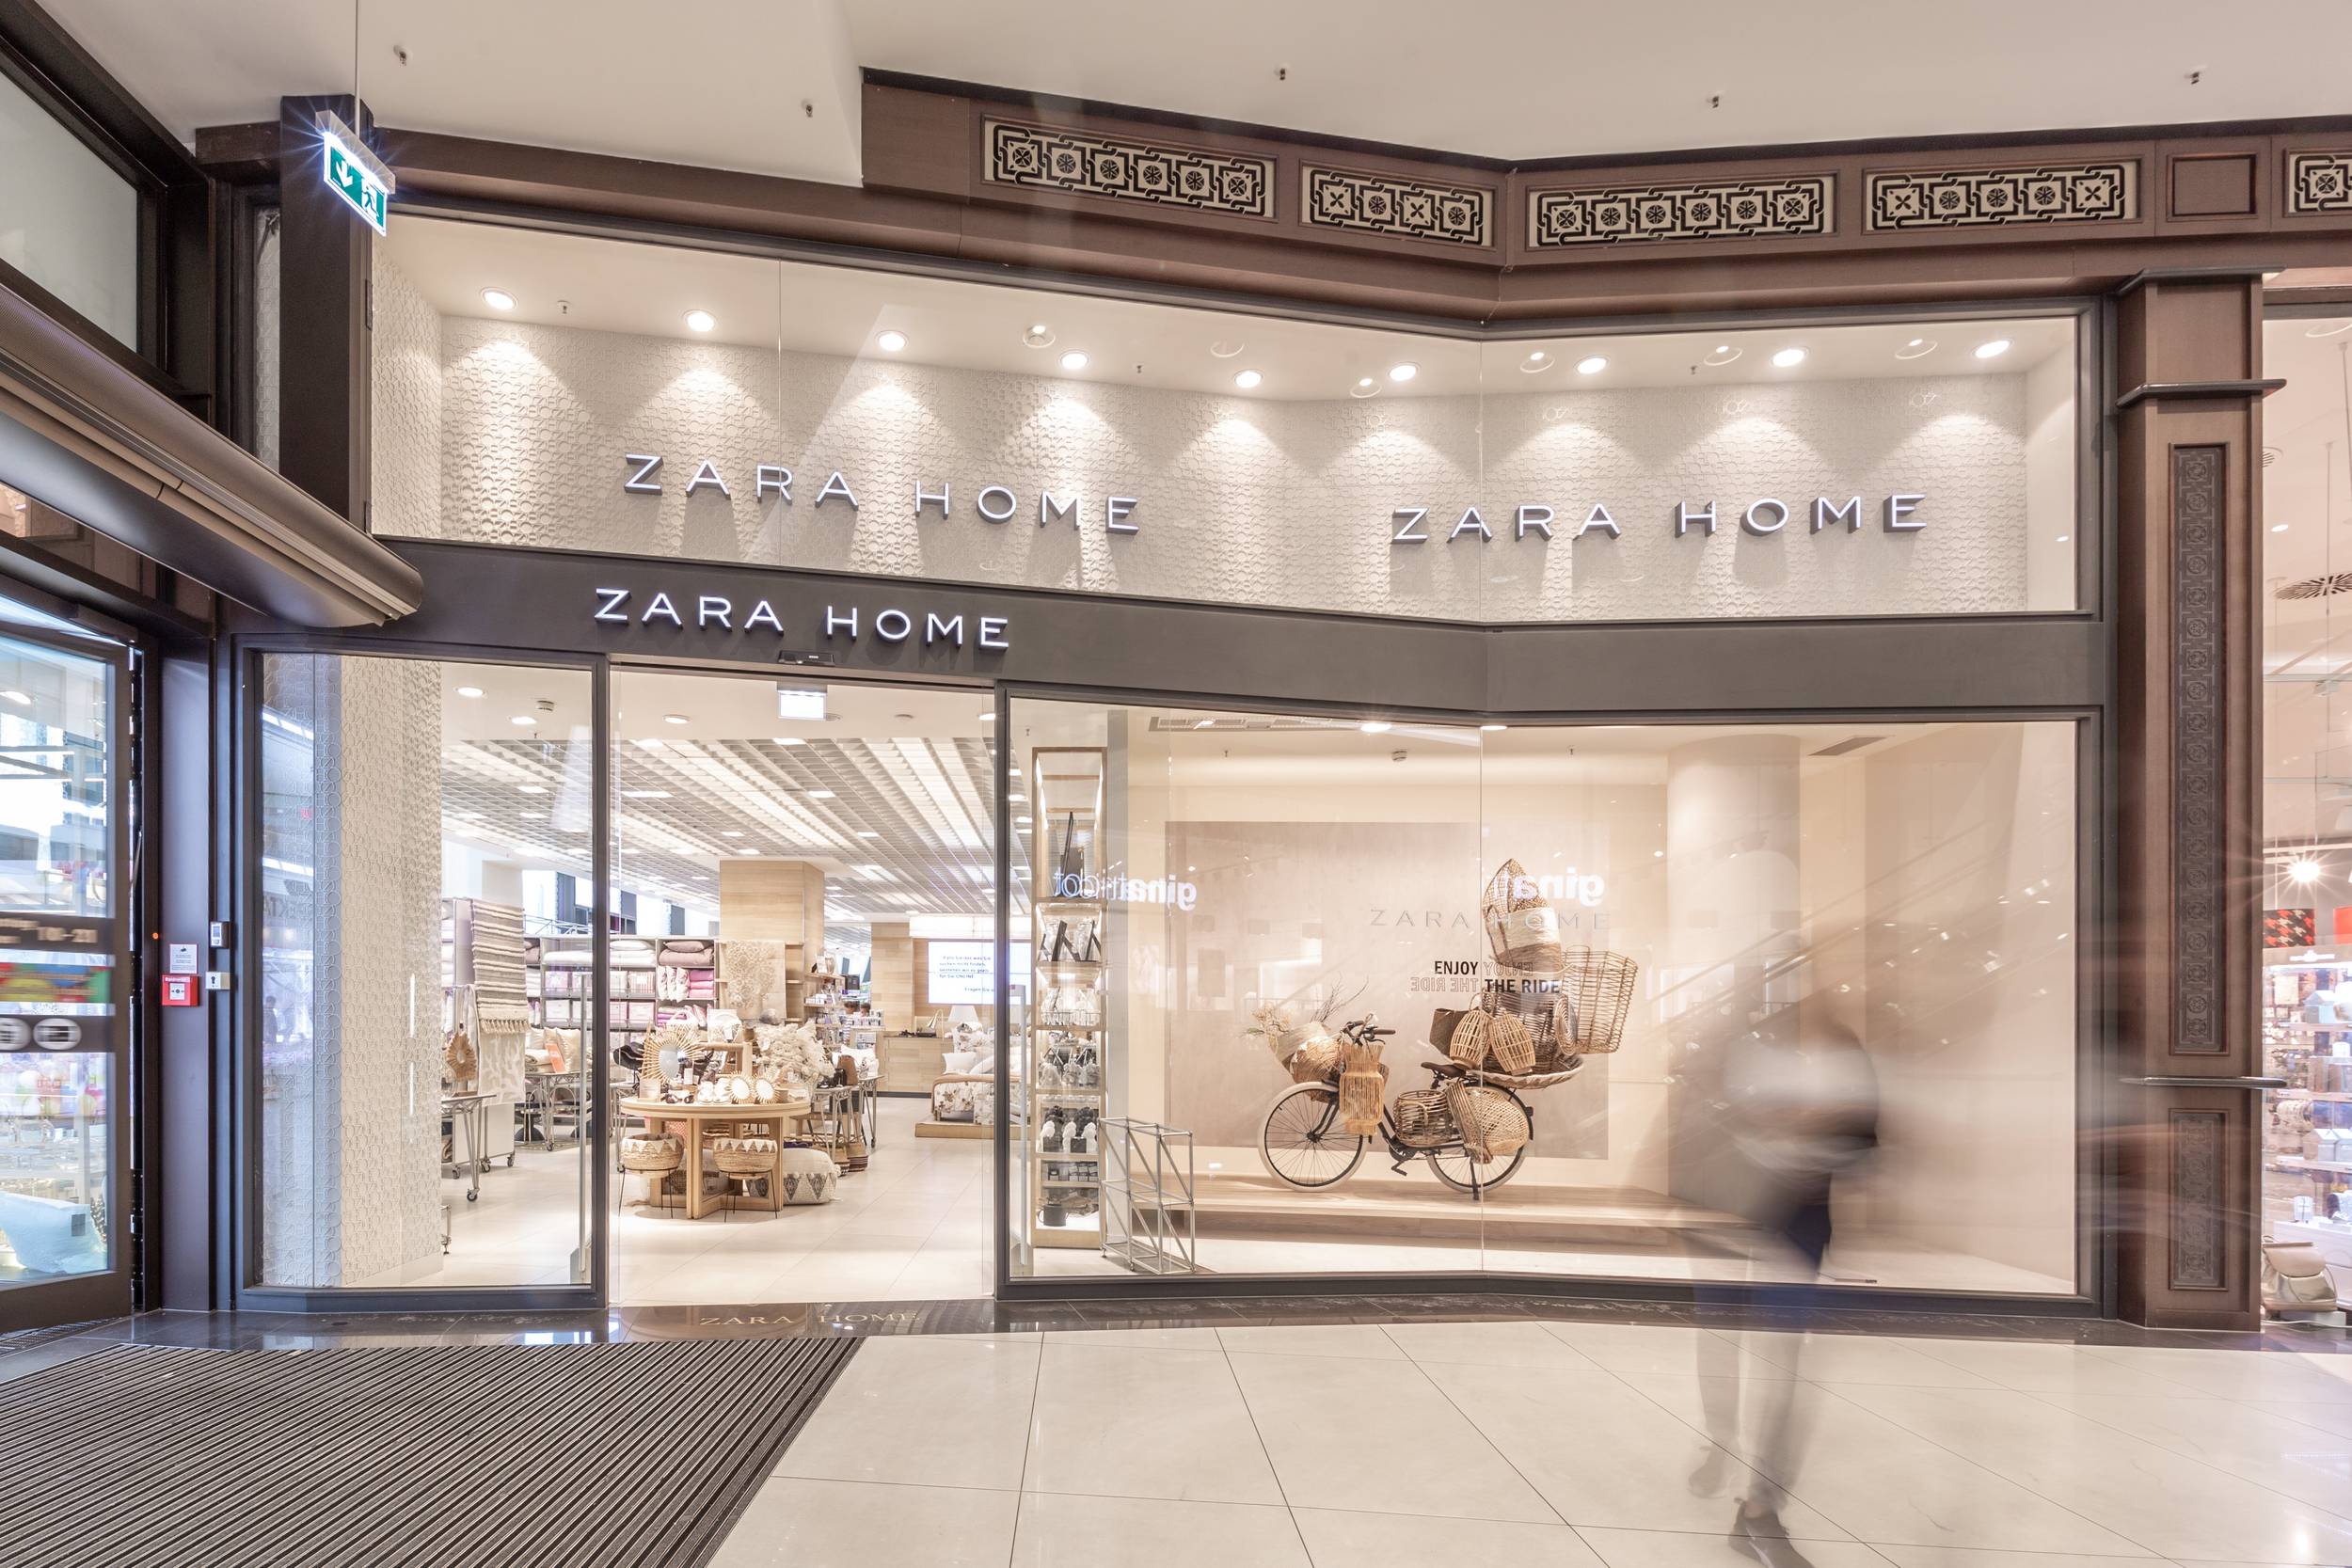 Zara Home at the Mall of Berlin